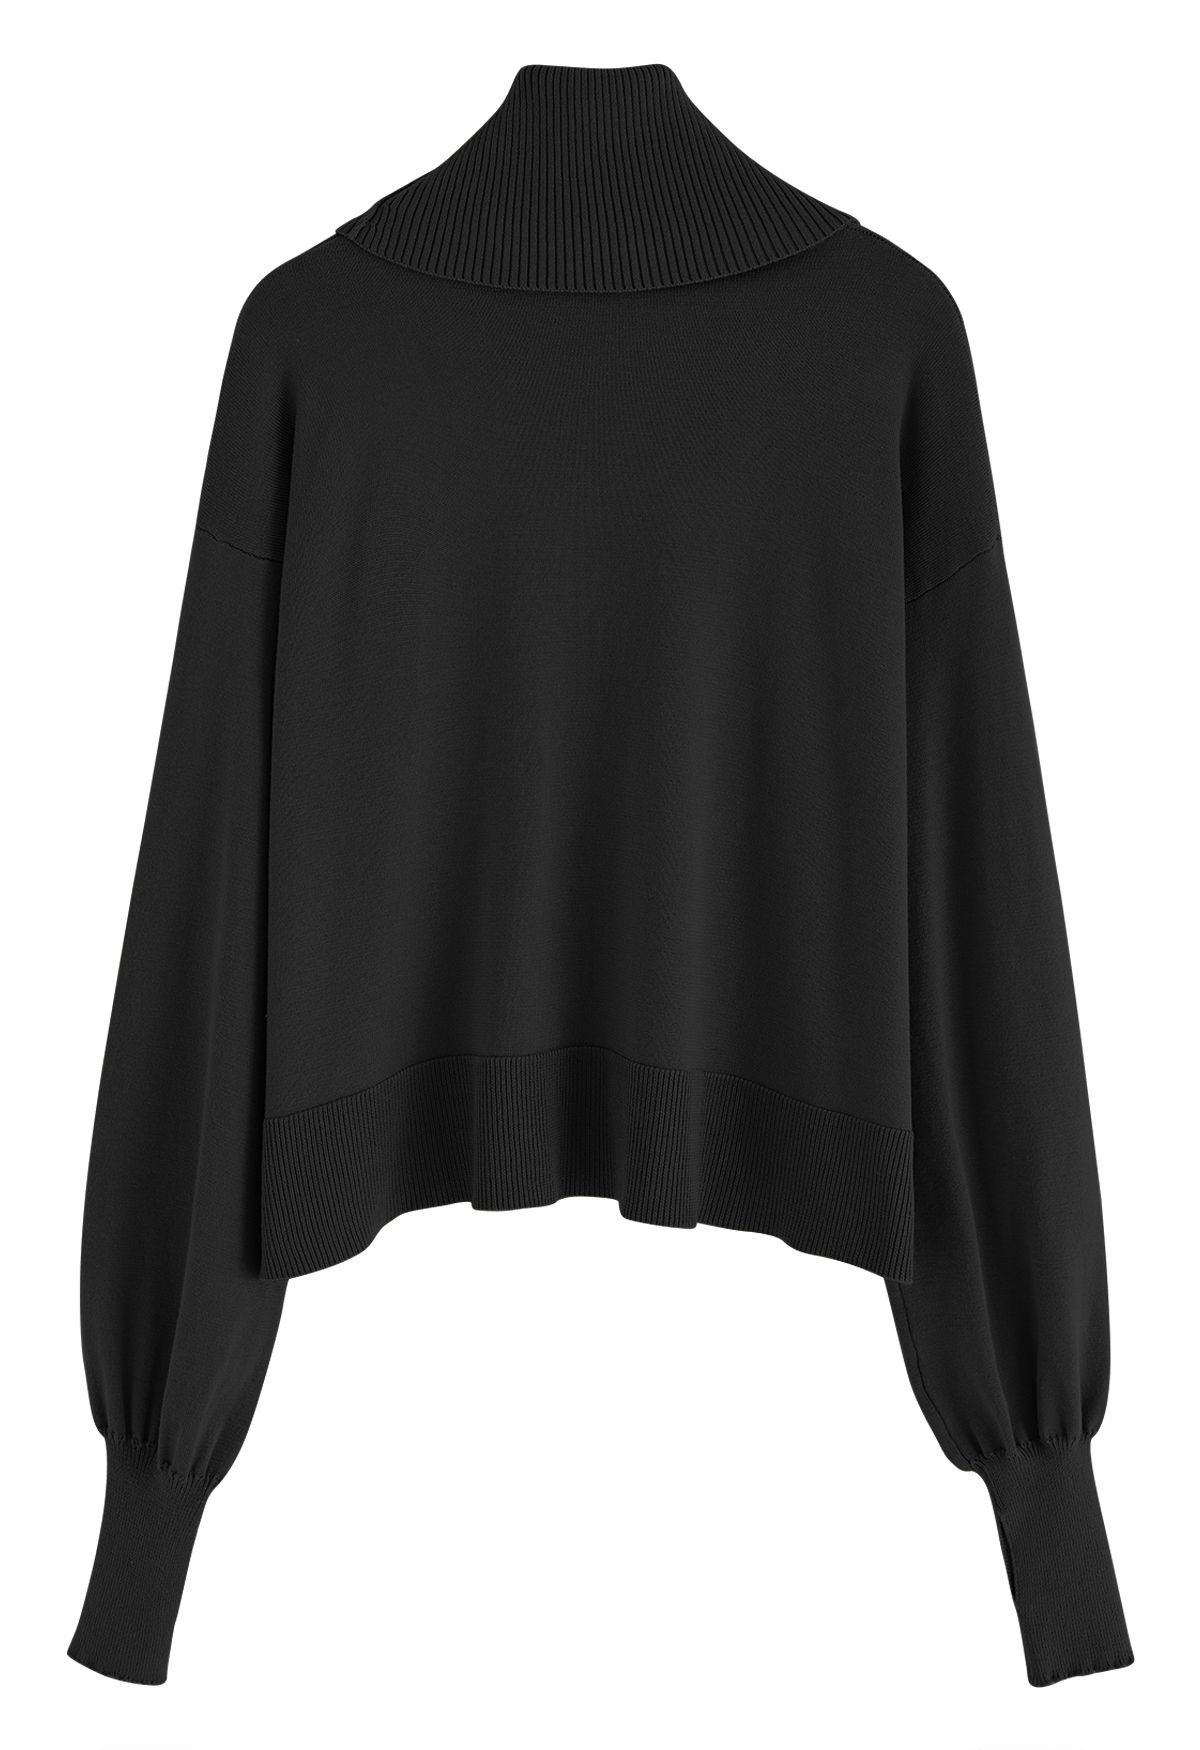 Turtleneck Side Buttons Slouchy Knit Top in Black